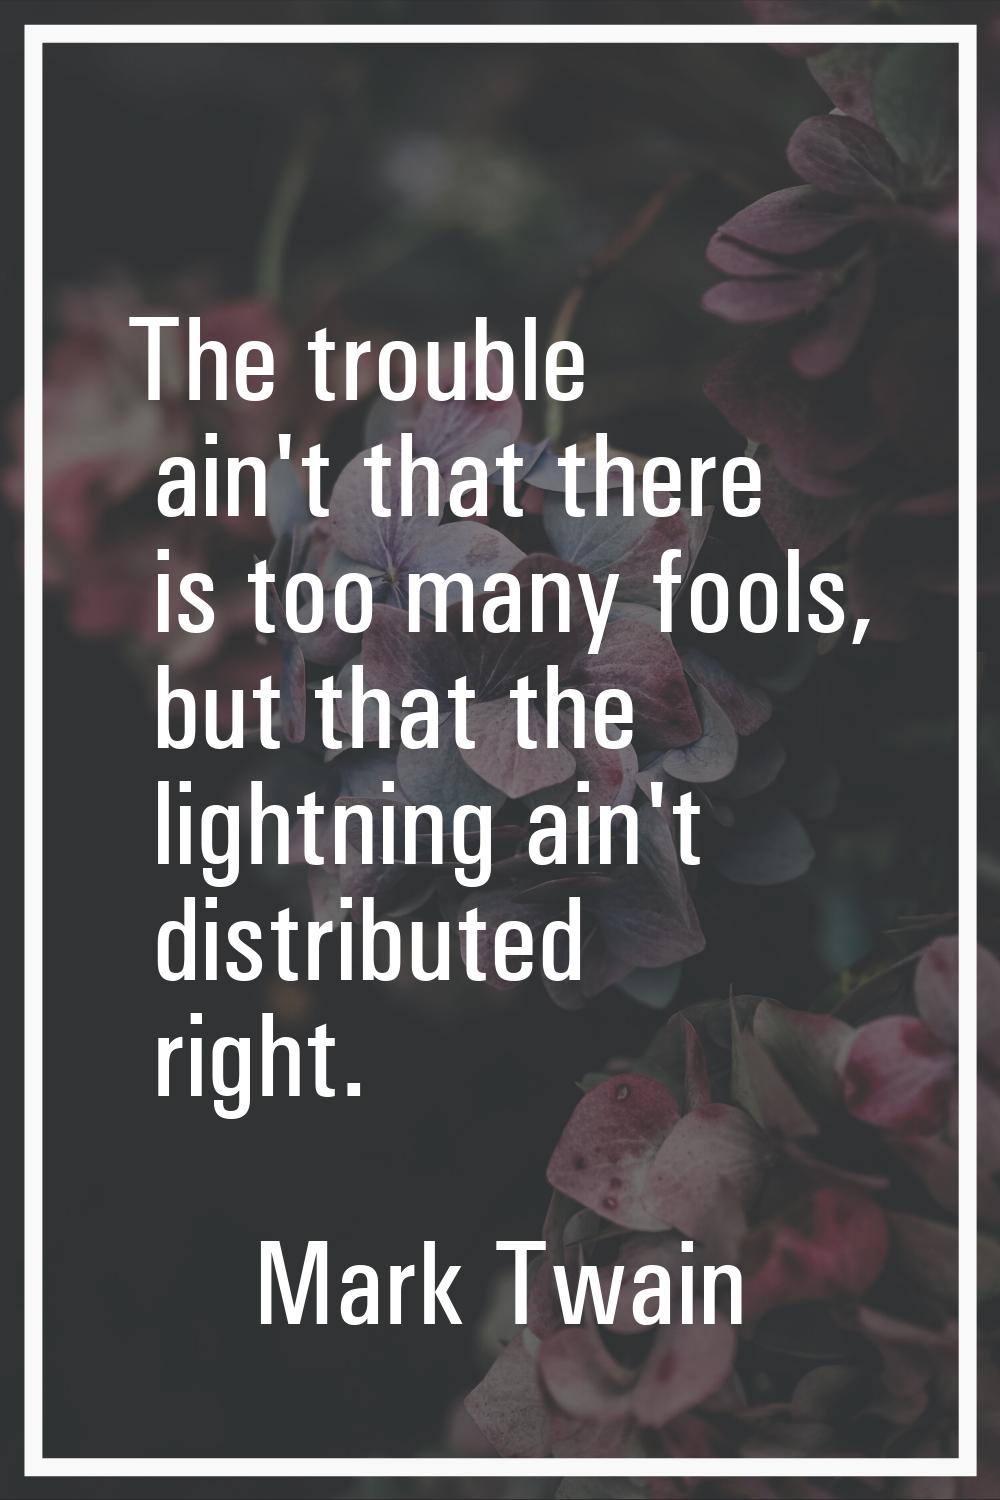 The trouble ain't that there is too many fools, but that the lightning ain't distributed right.